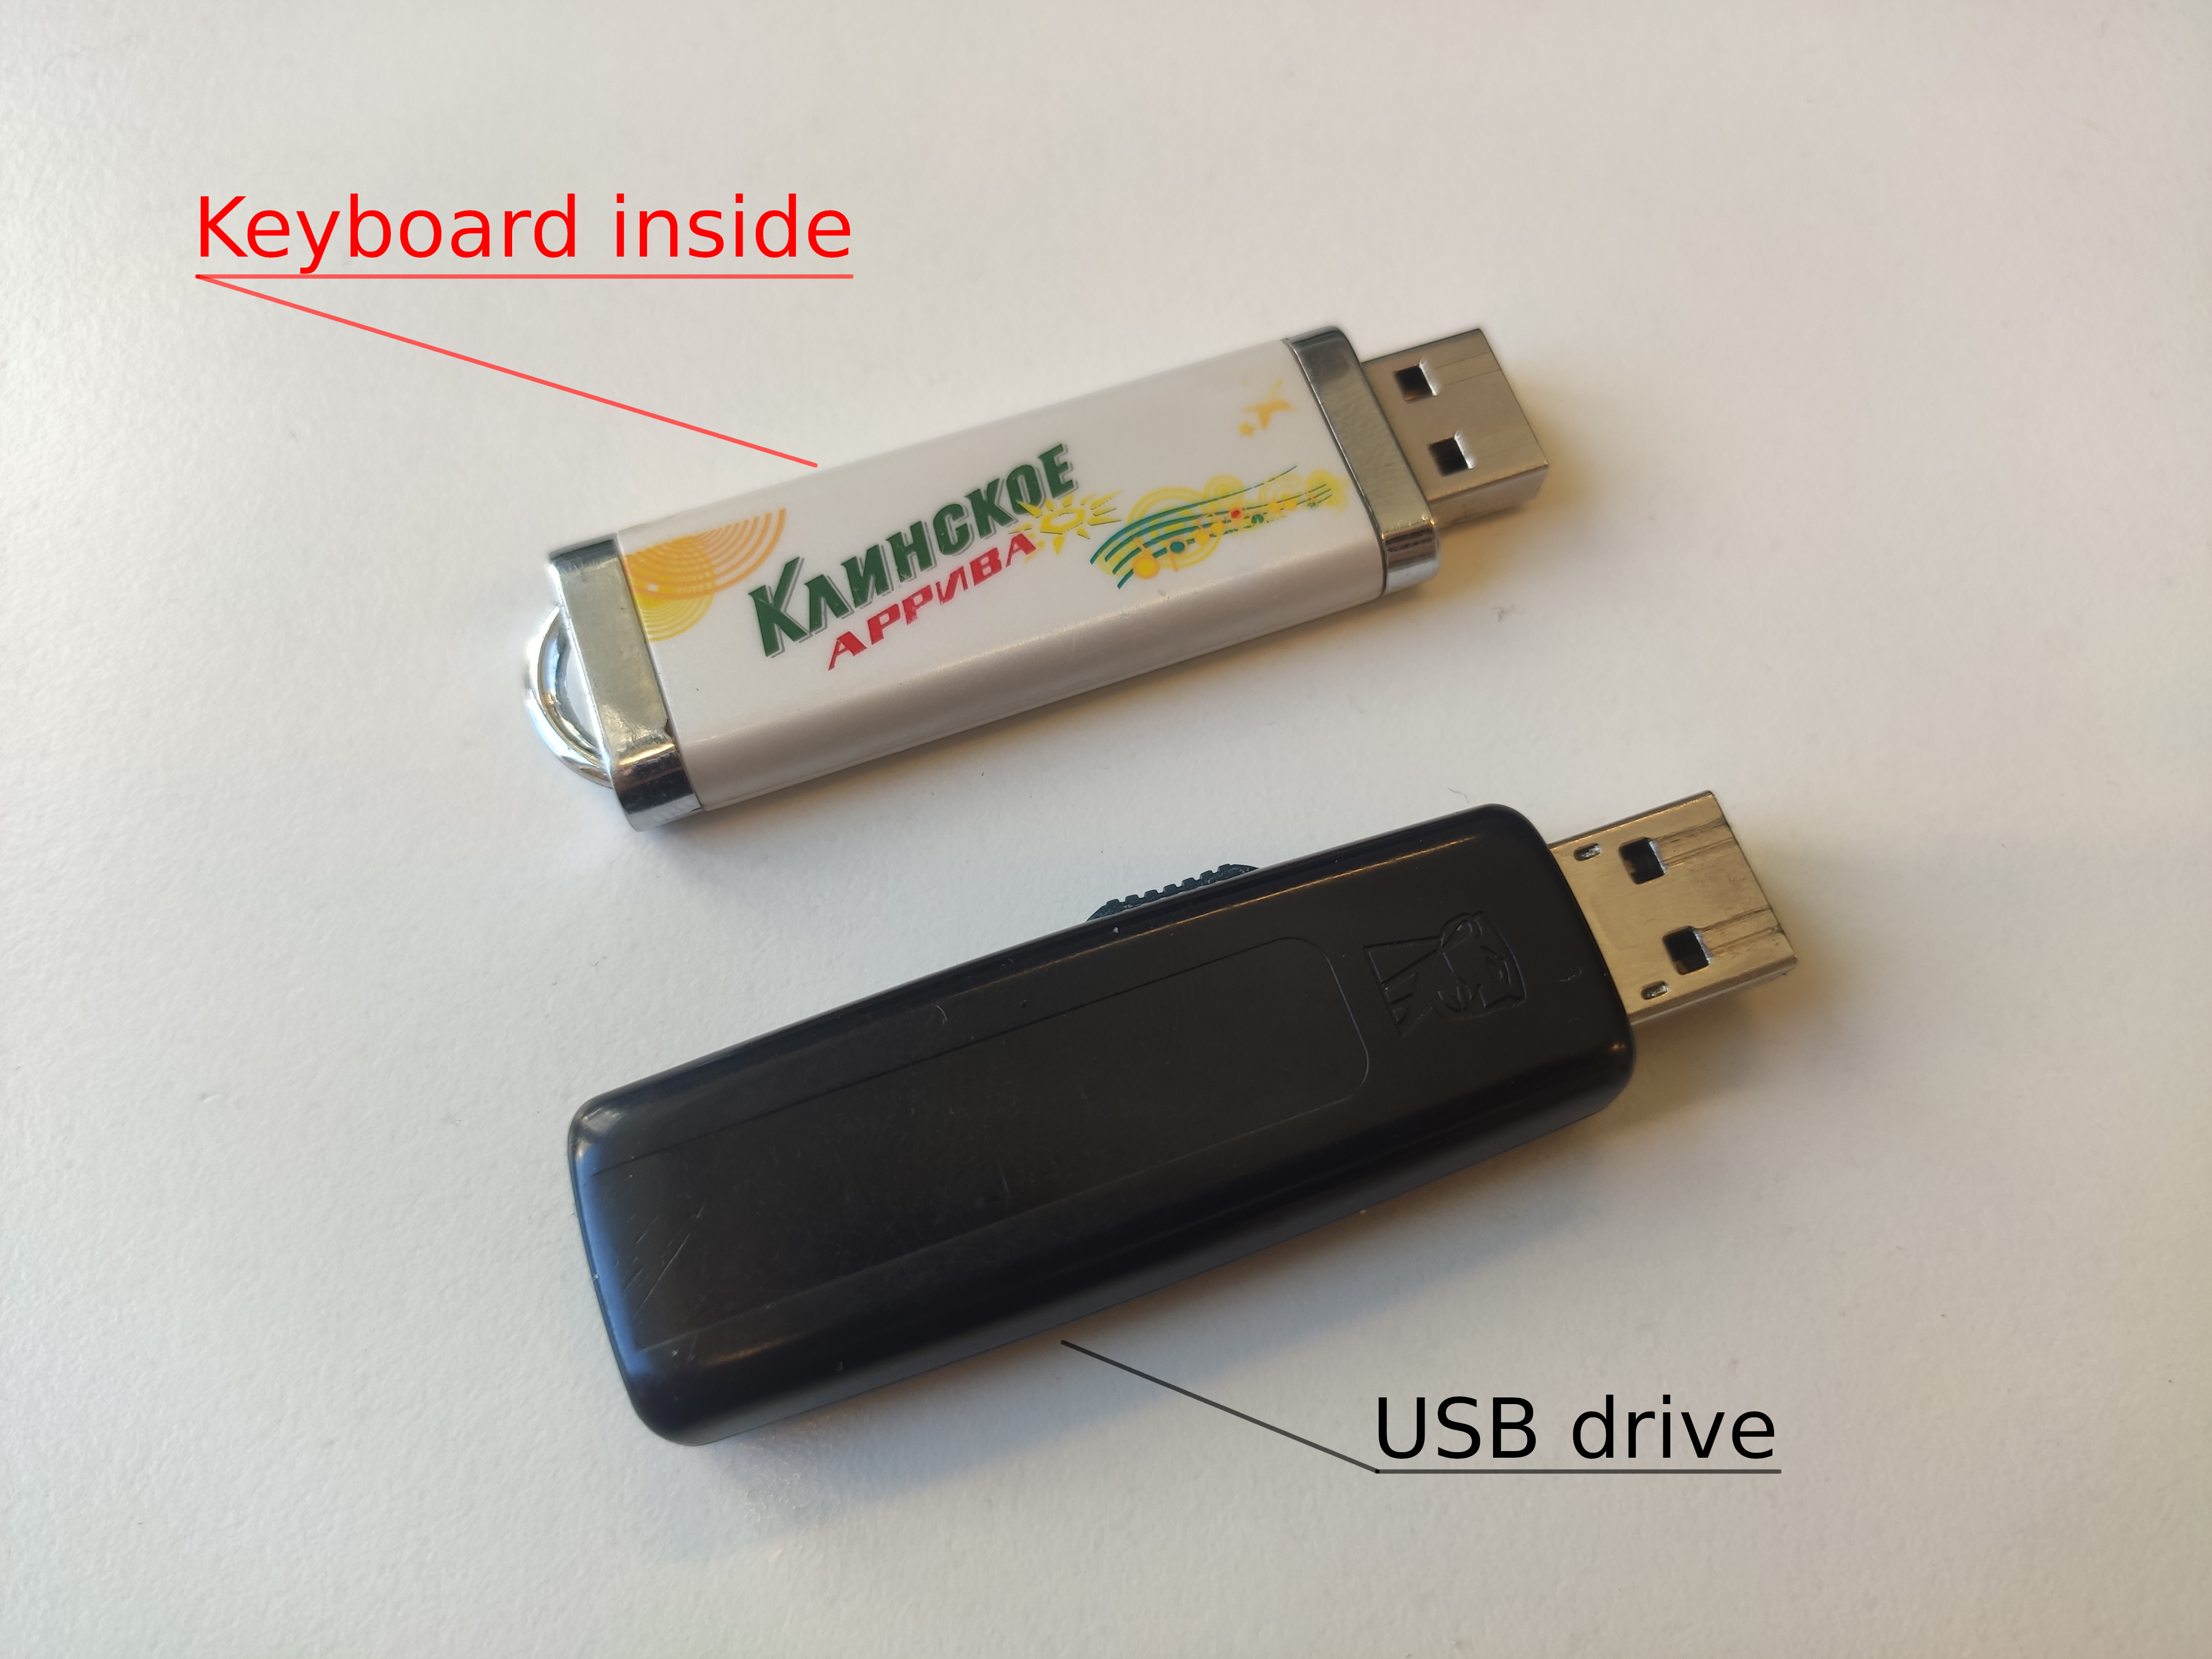 A keyboard and a flash drive: find a difference